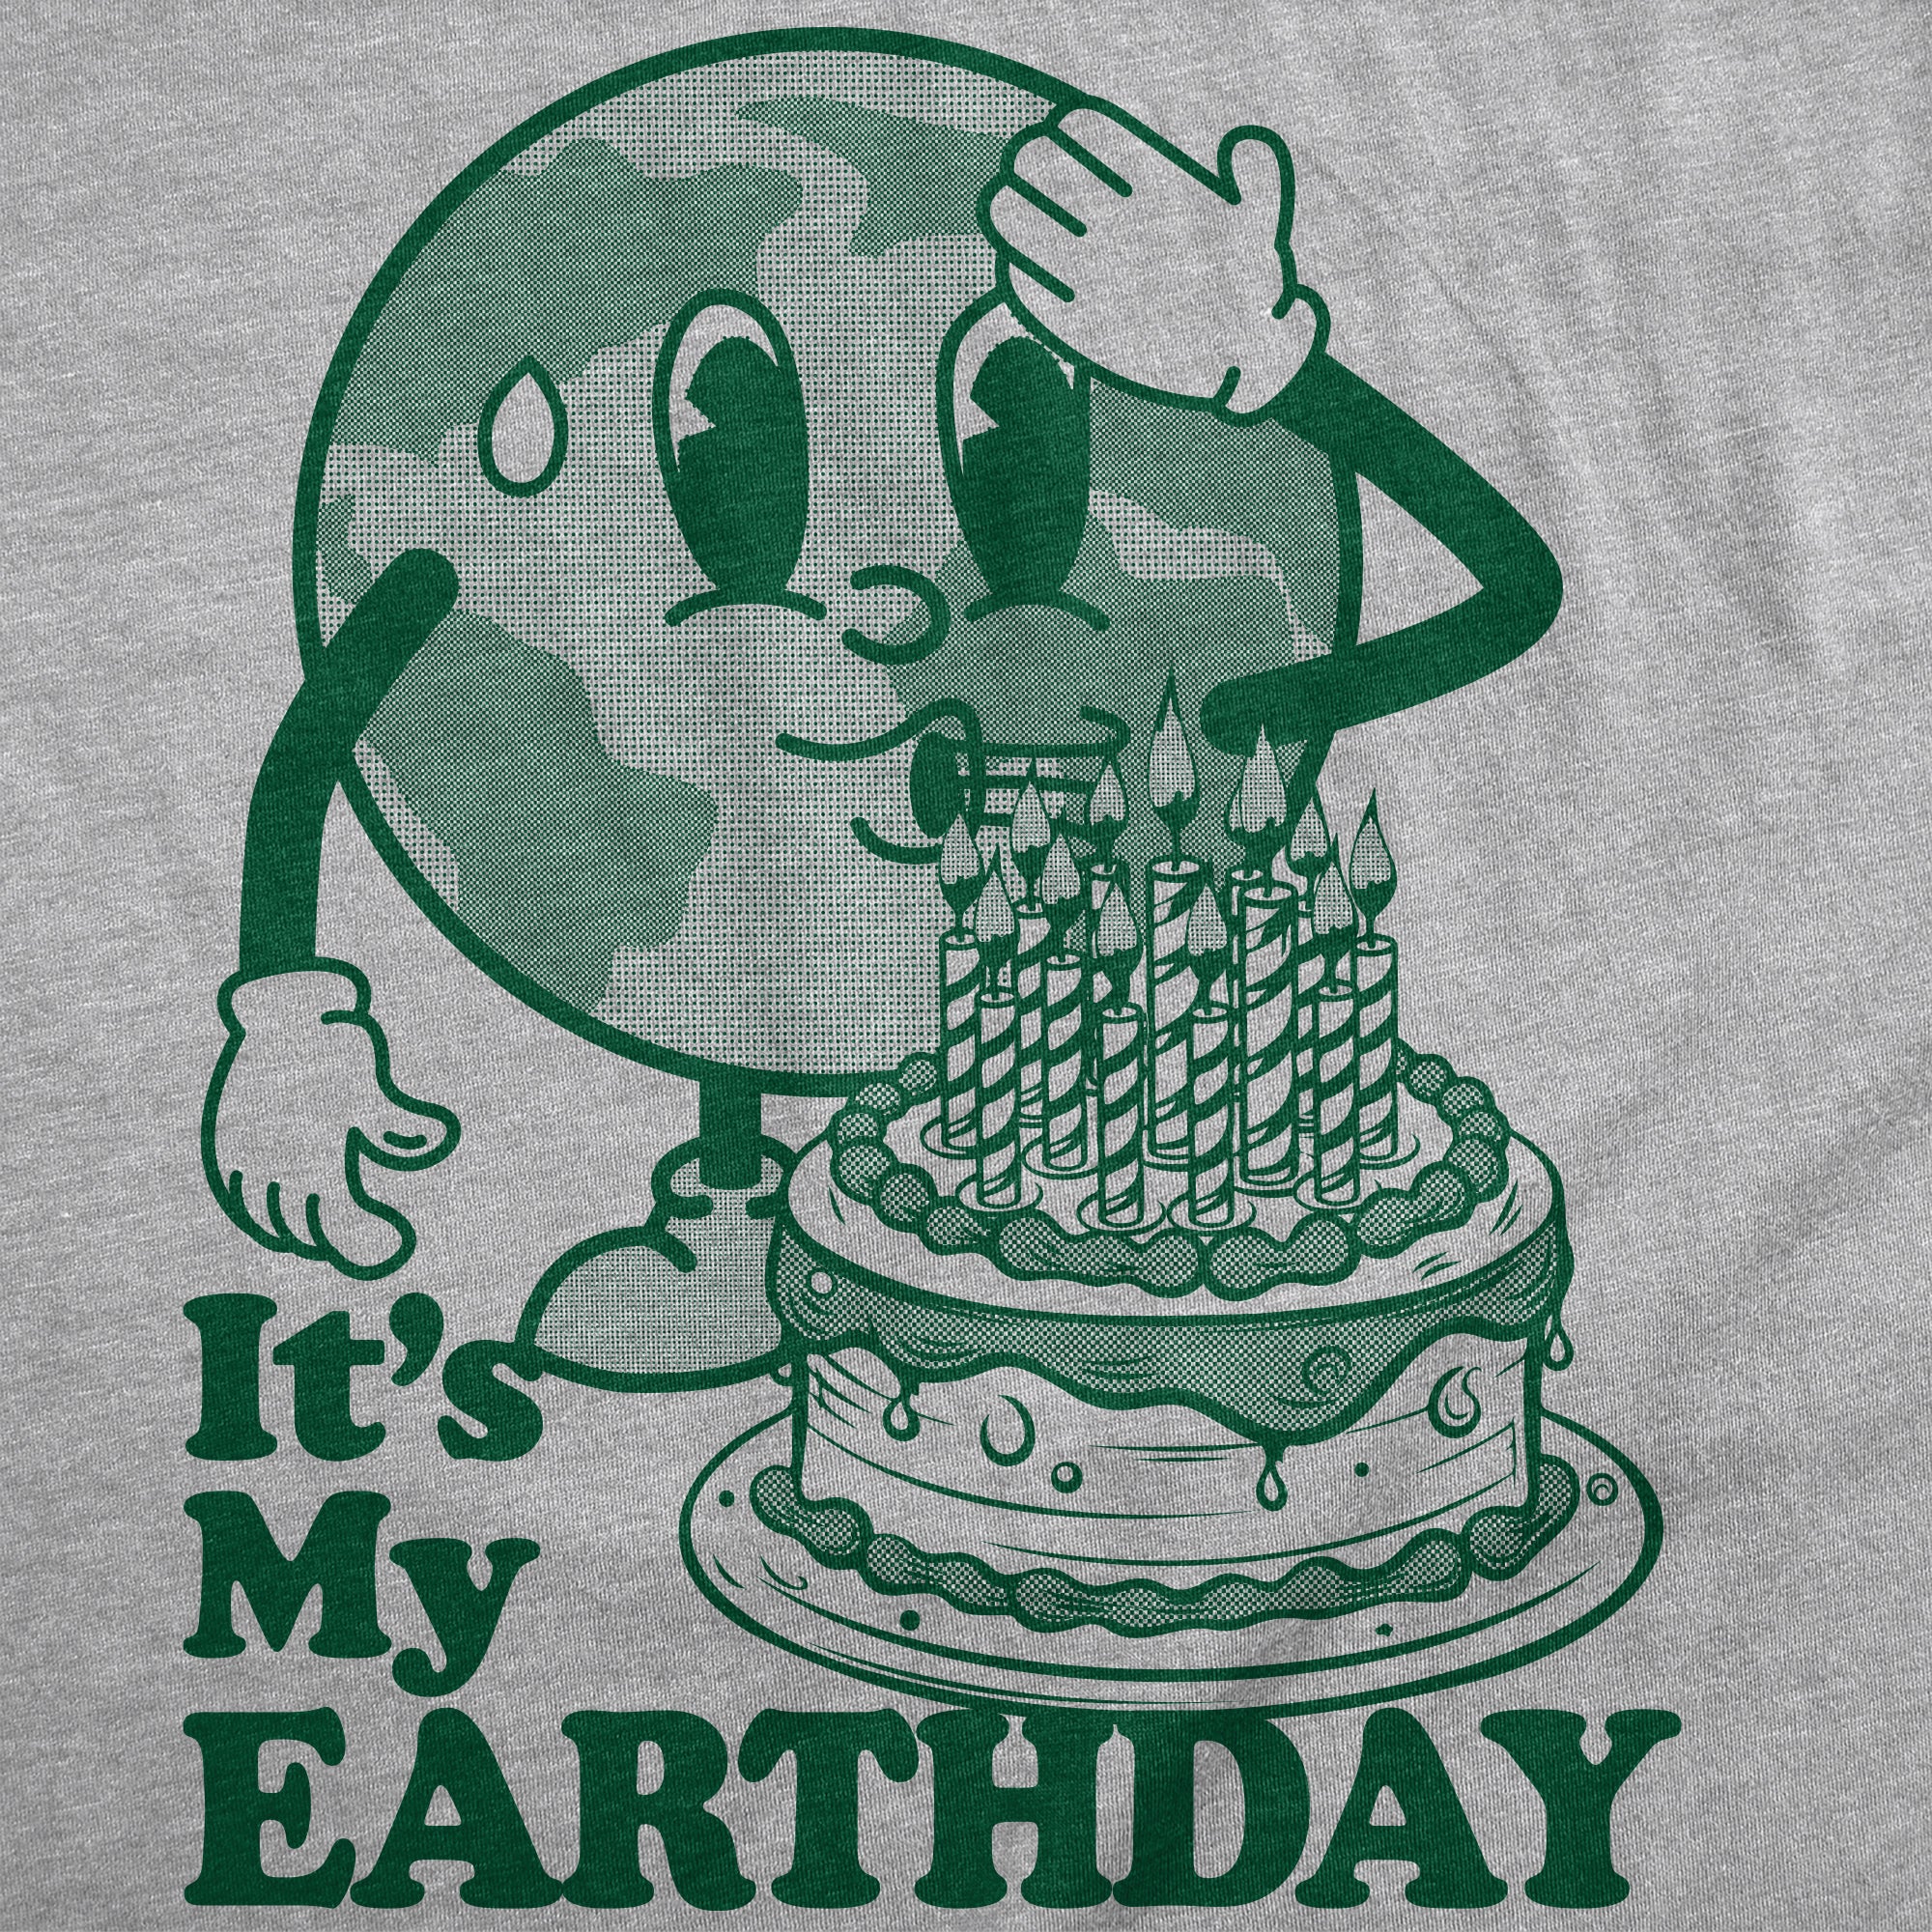 Funny Light Heather Grey - Its My Earthday Its My Earth Day Womens T Shirt Nerdy Earth sarcastic Tee